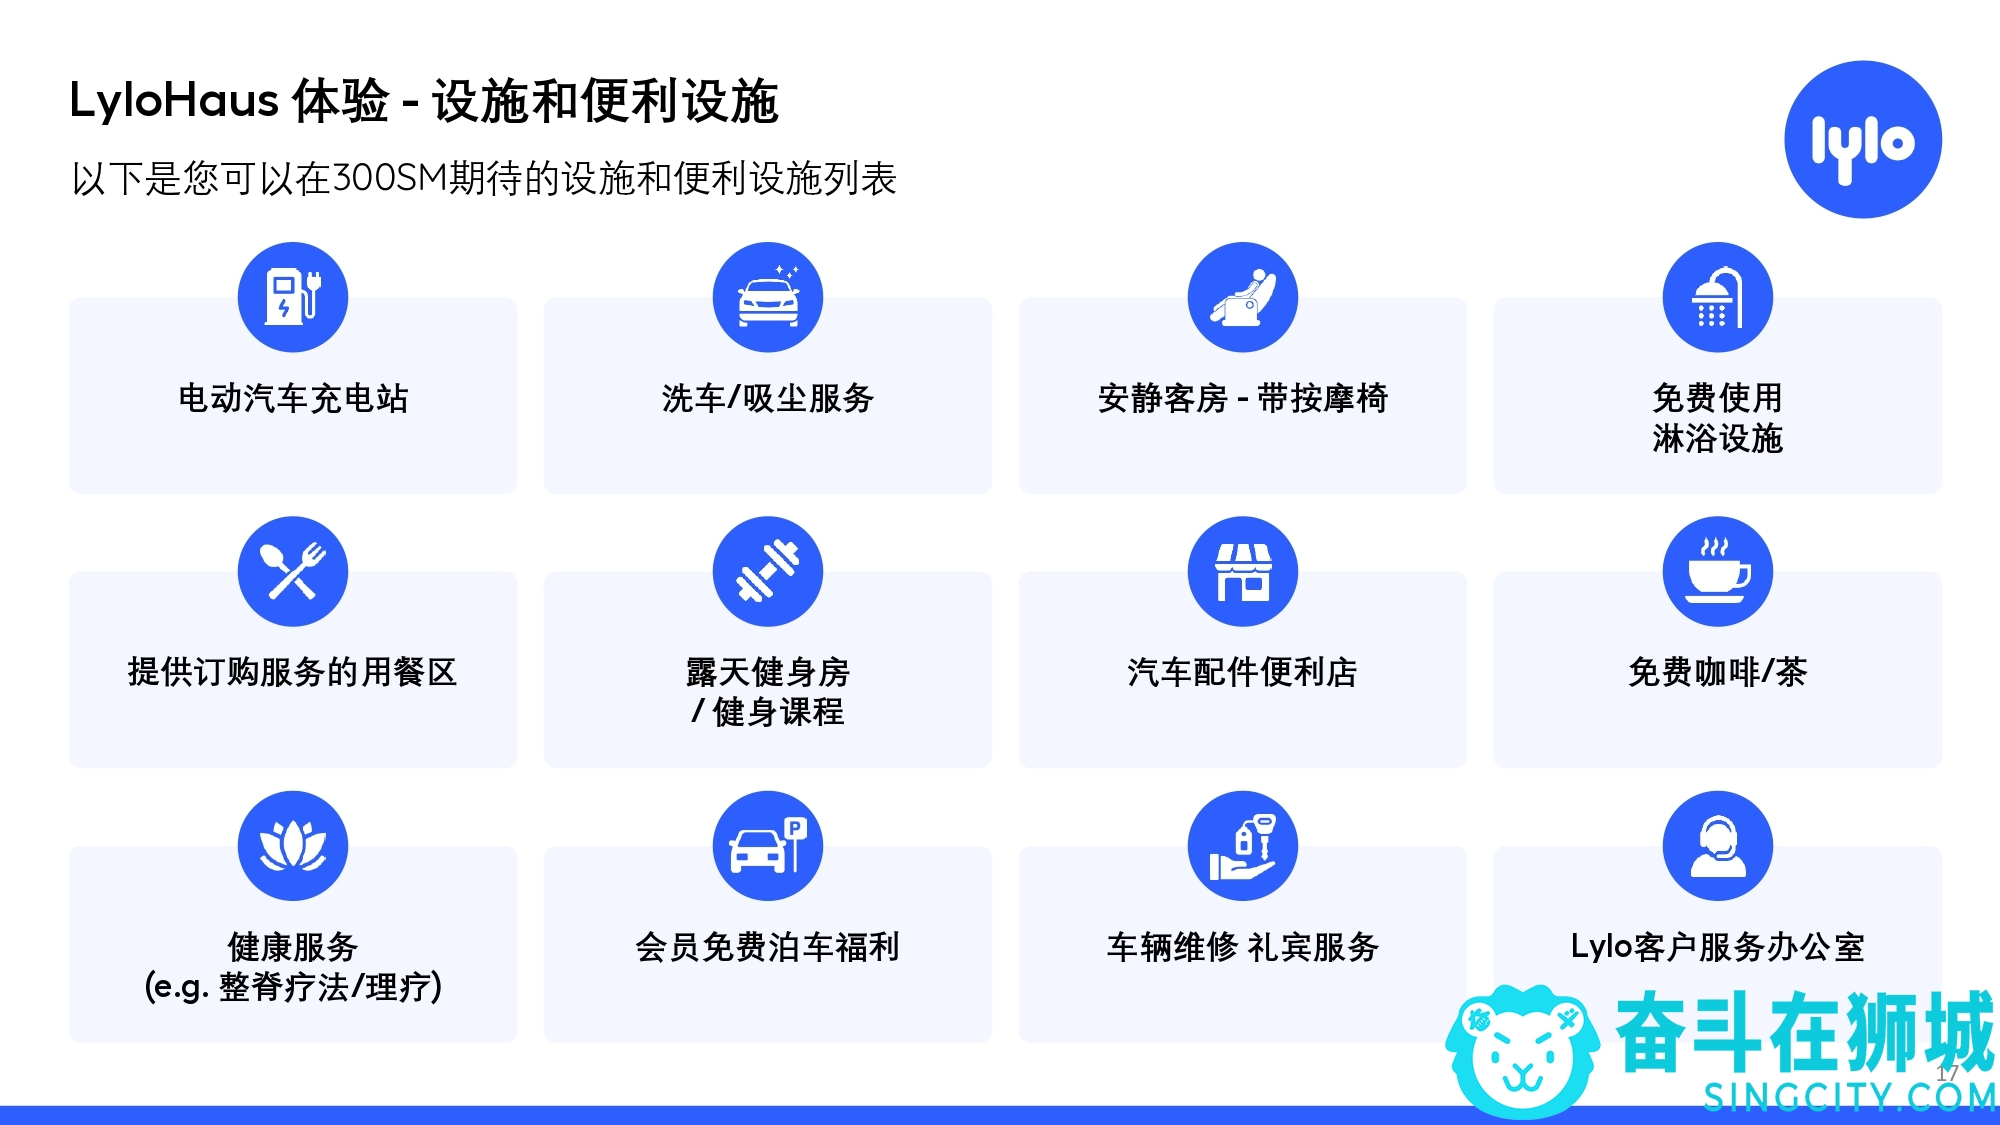 Lylo Introductory Deck v1.2 Chinese version_page-0017.jpg